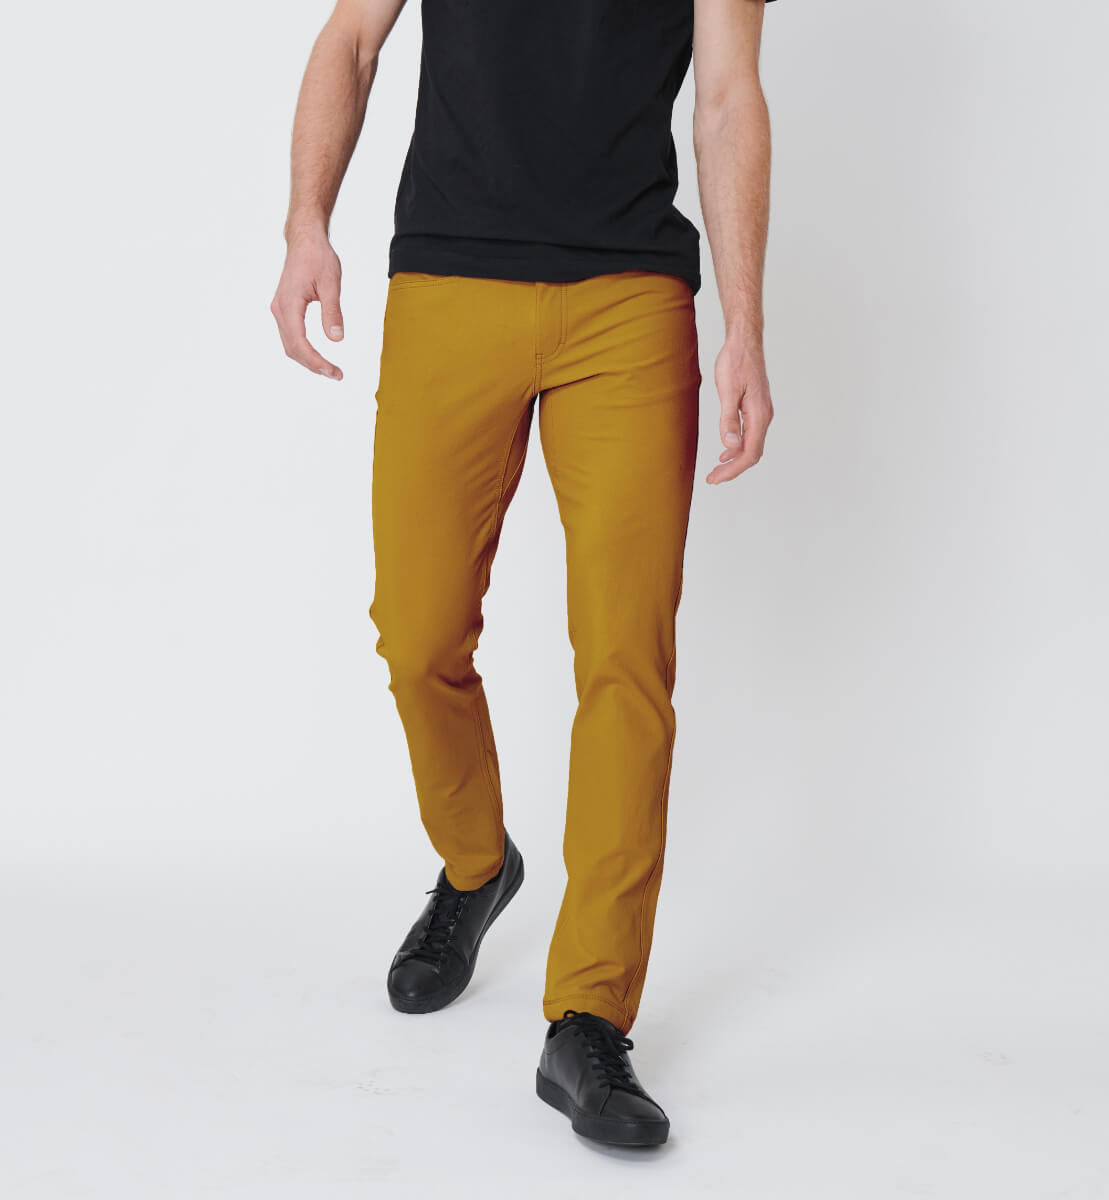 H&W: Tom is 6’ / 170 lbs. wearing size Medium#color_canyon